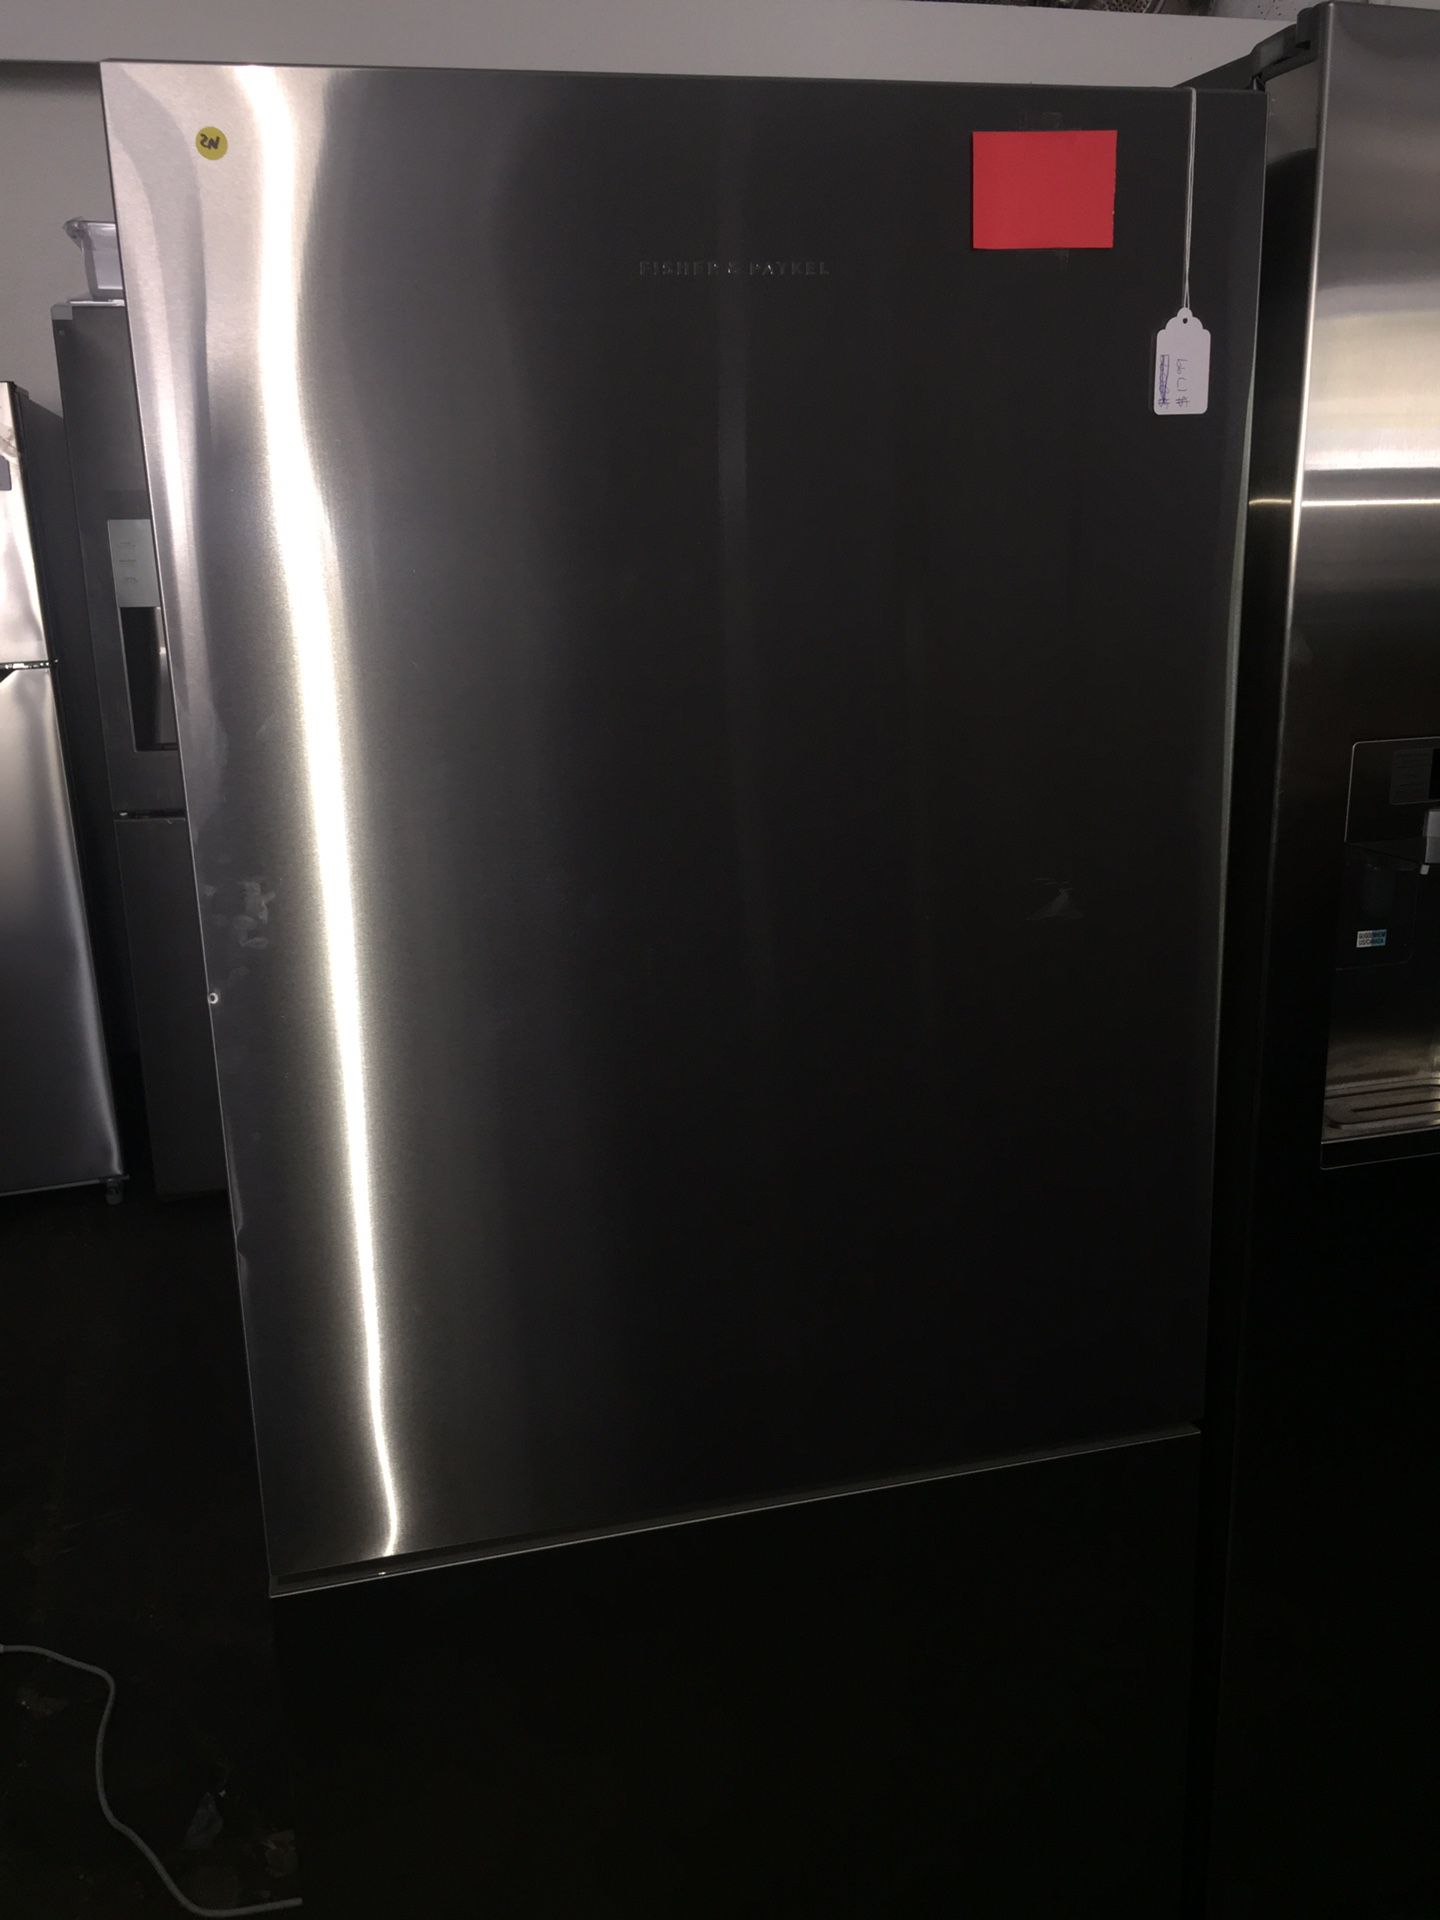 Fisher and Paykel 31” wide counter depth bottom freezer fridge